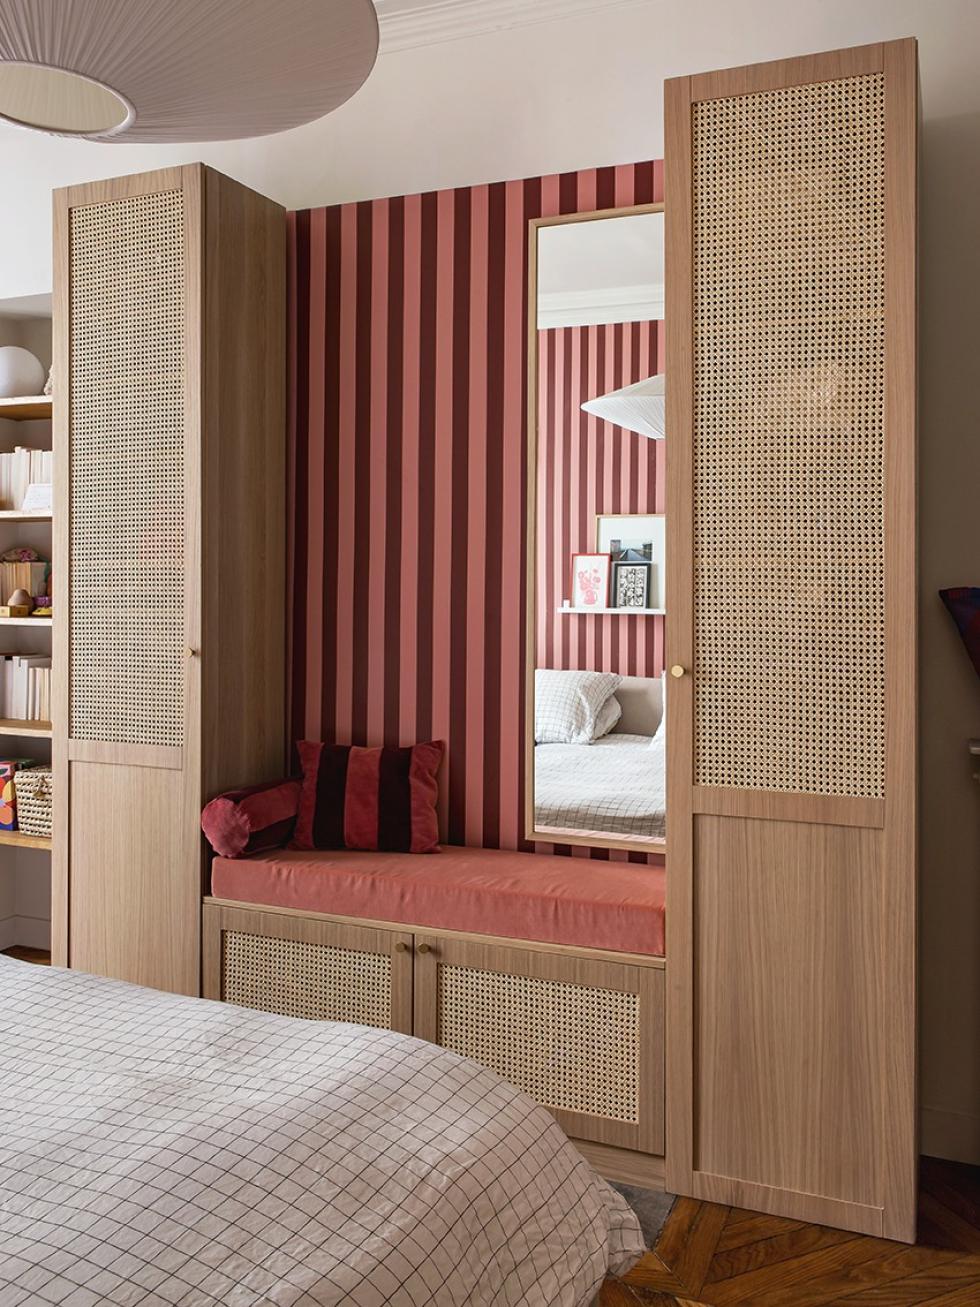 Lisa Gachet's bedroom, with burgundy and pink wallpaper, and a cane and oak wardrobe.